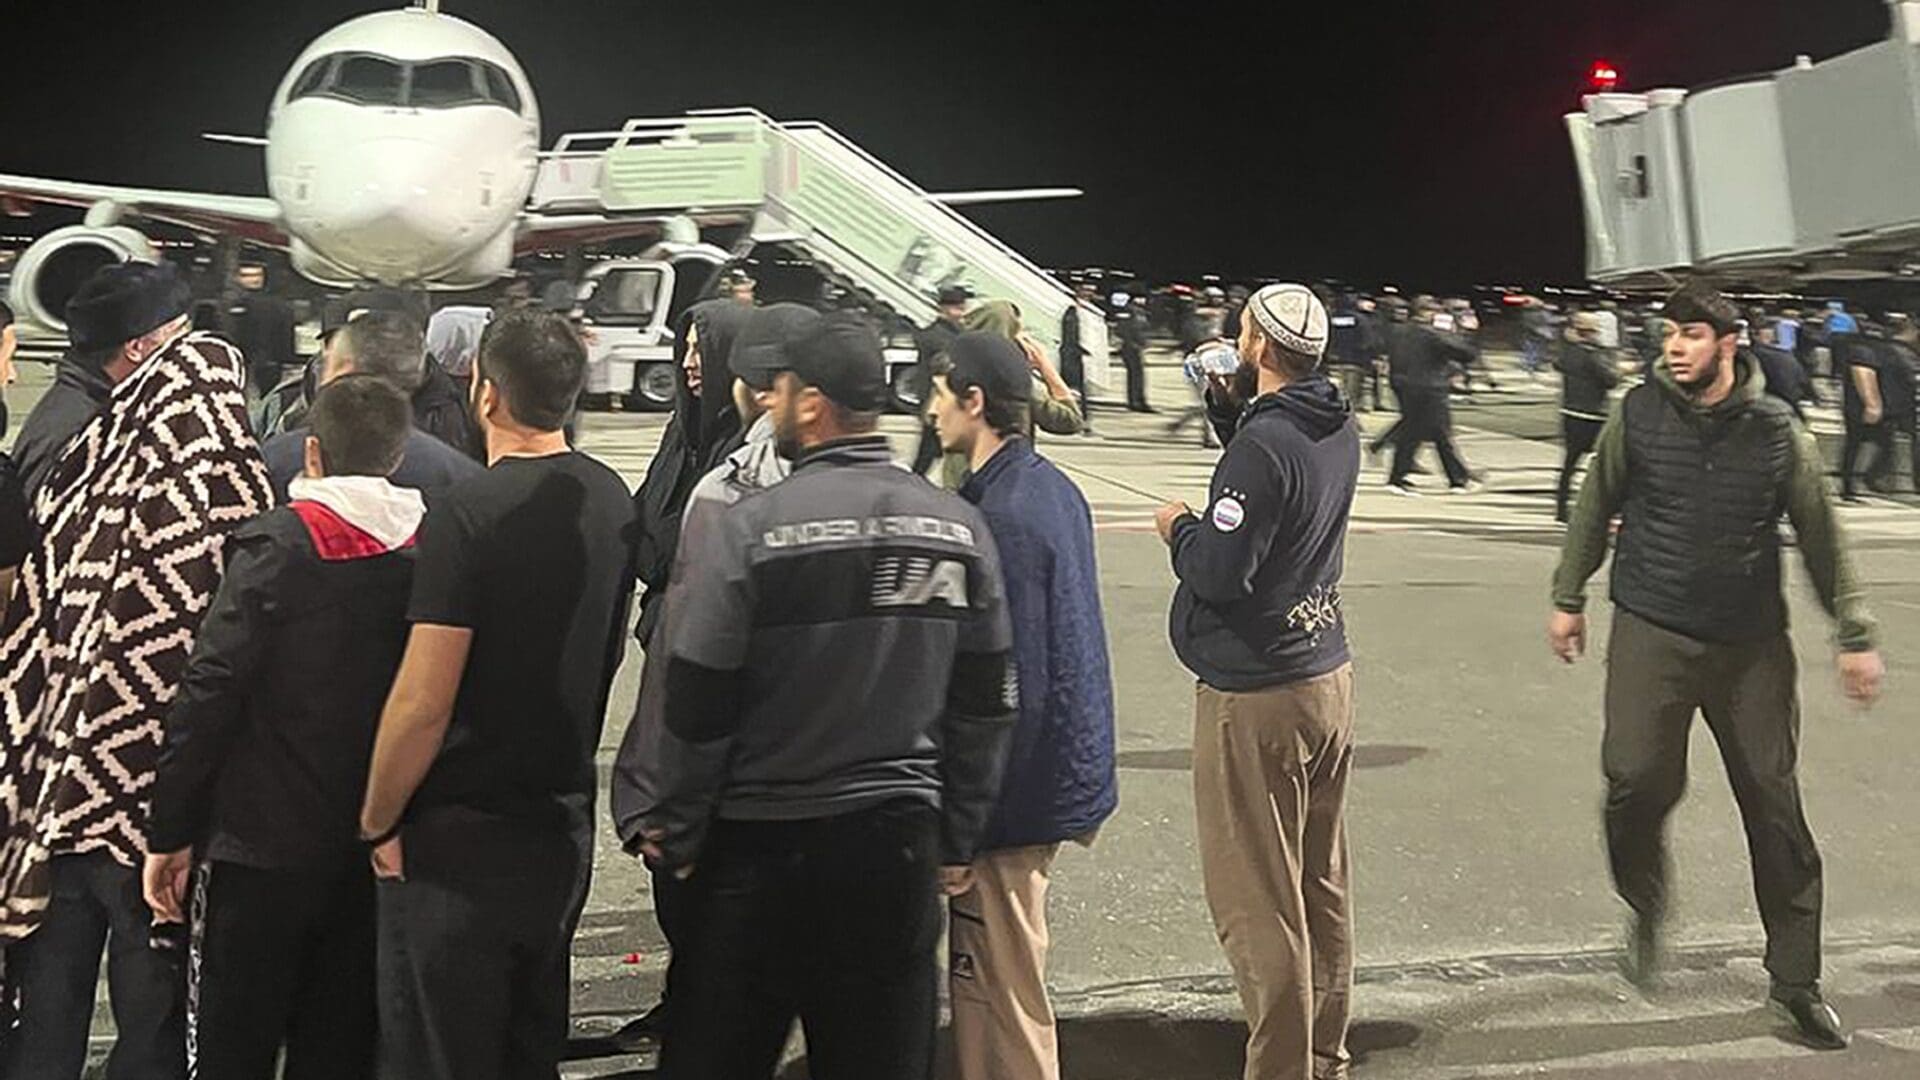 Pro-Palestinian protesters storm the runway of the Makhachkala airport in Dagestan, Russia after news that a plane from Tel Aviv had landed on 29 October 2023.